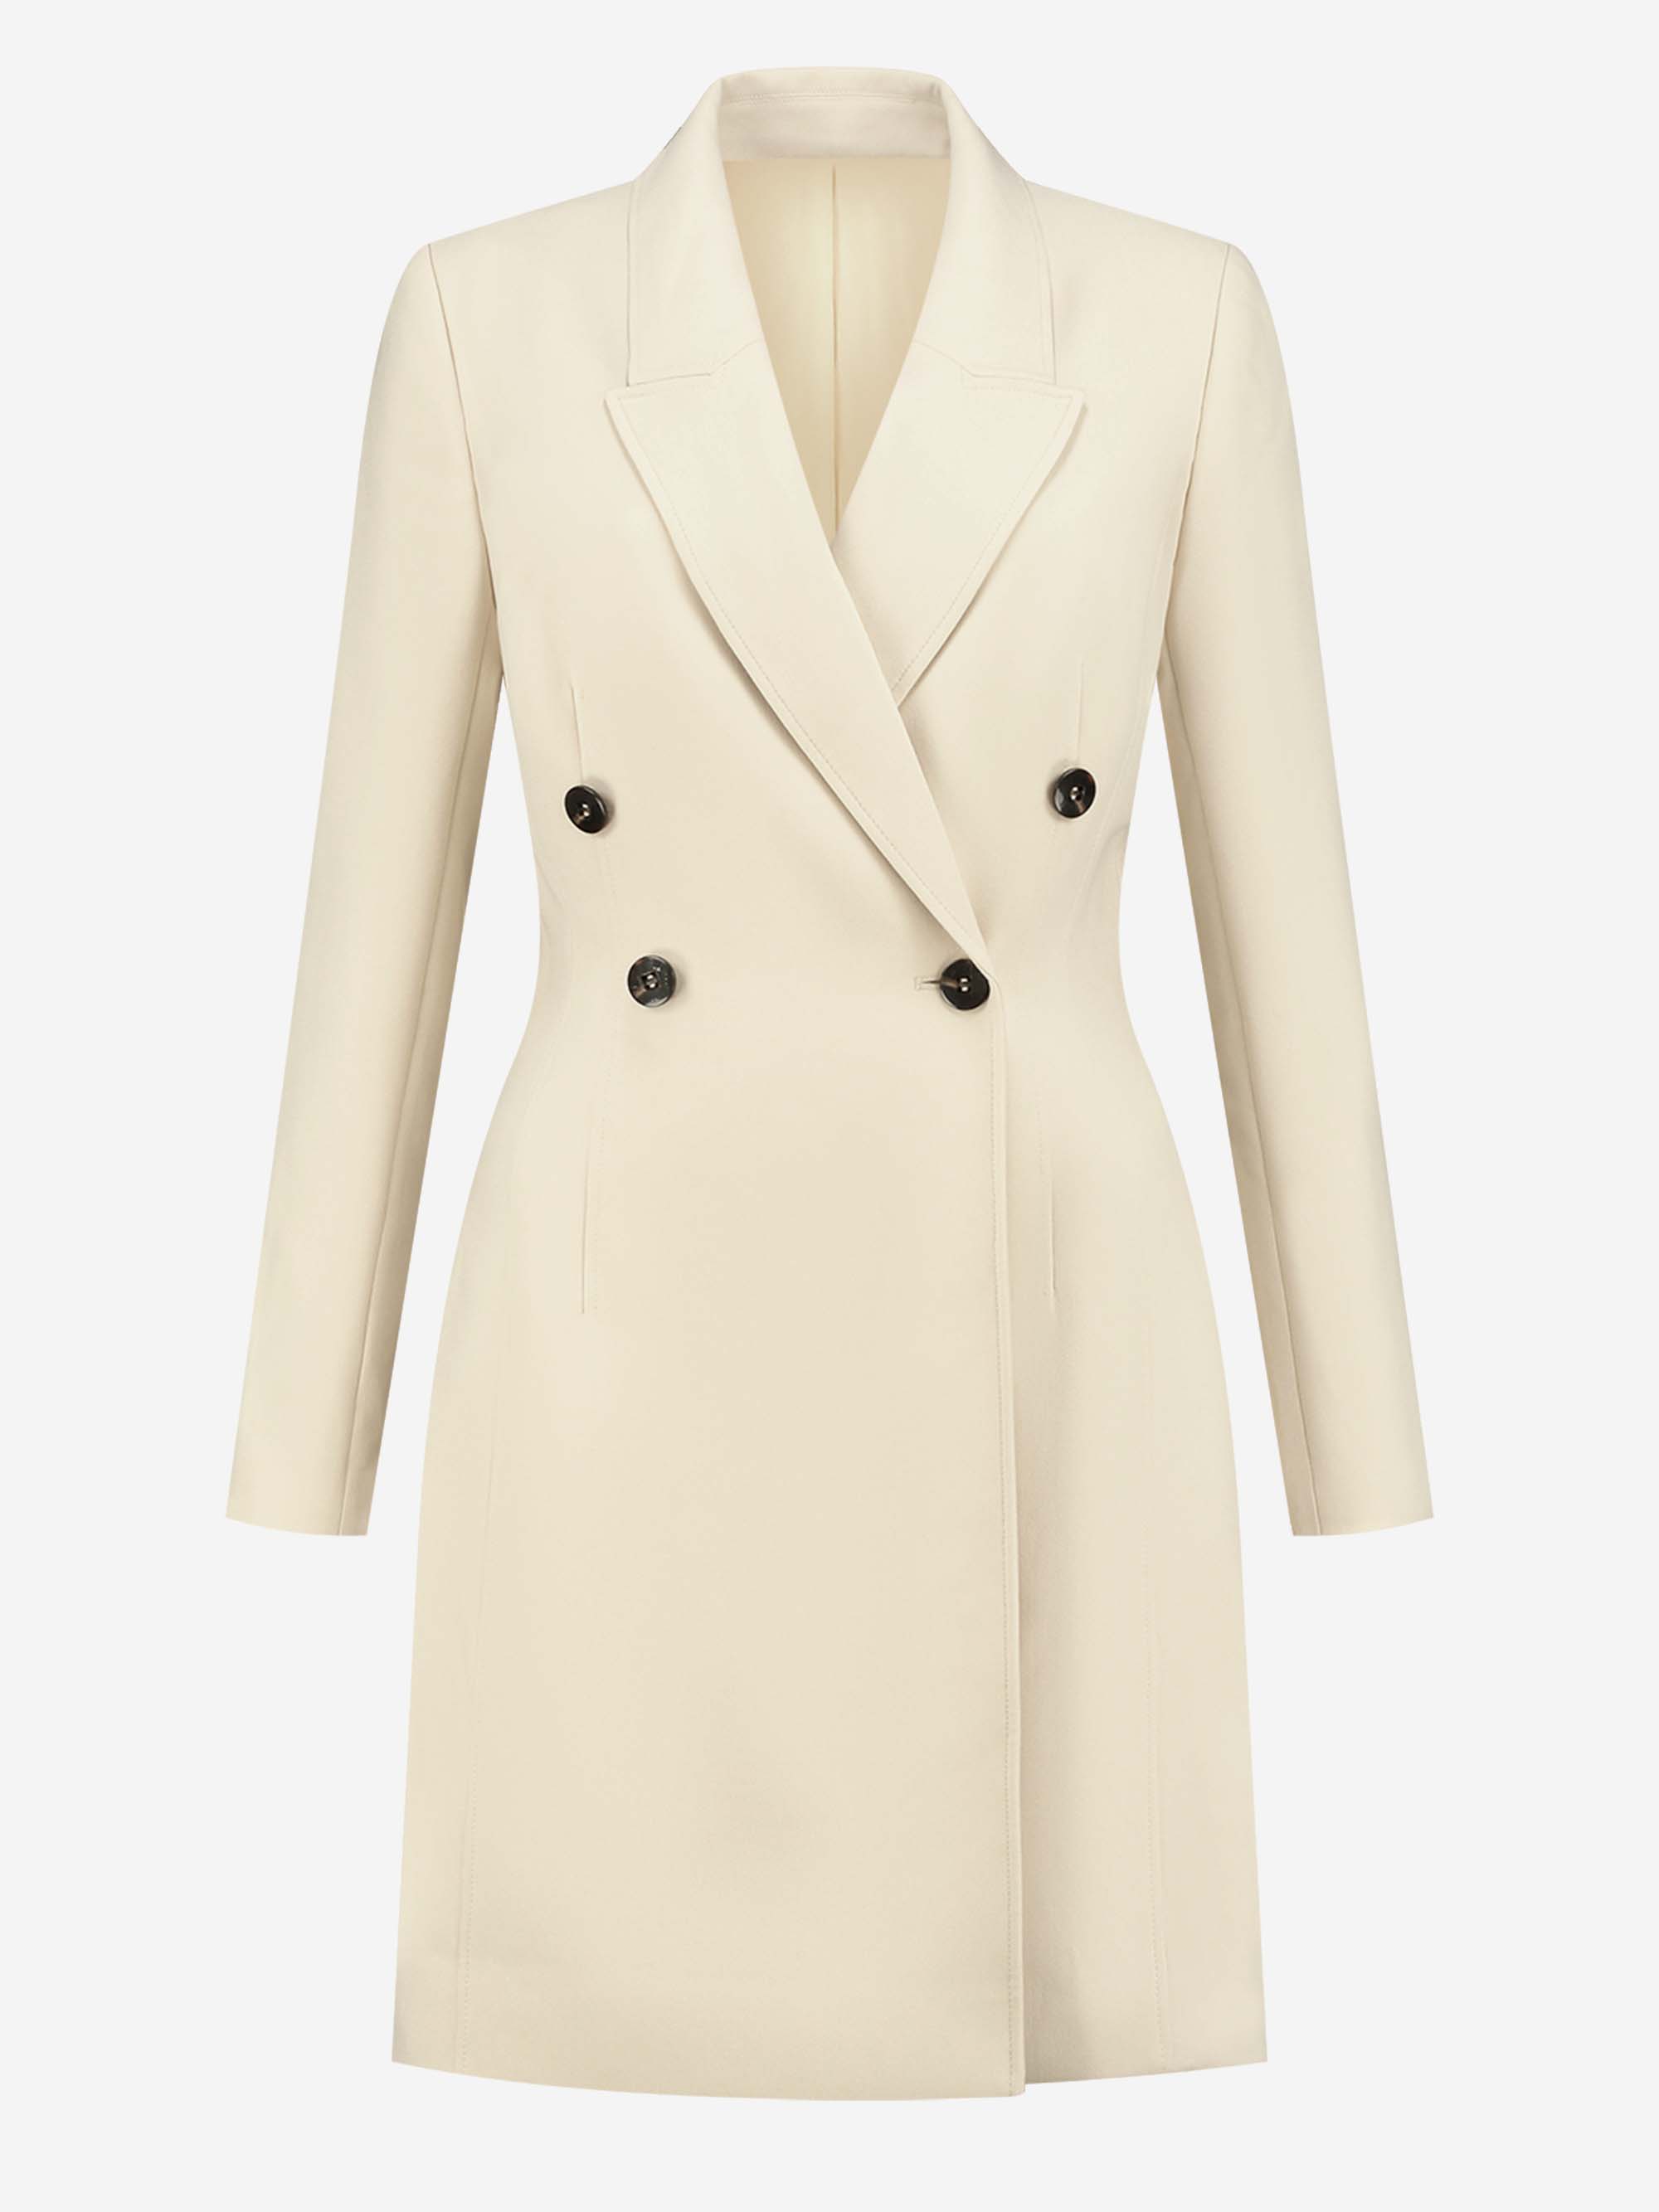 Fitted double breasted blazer dress